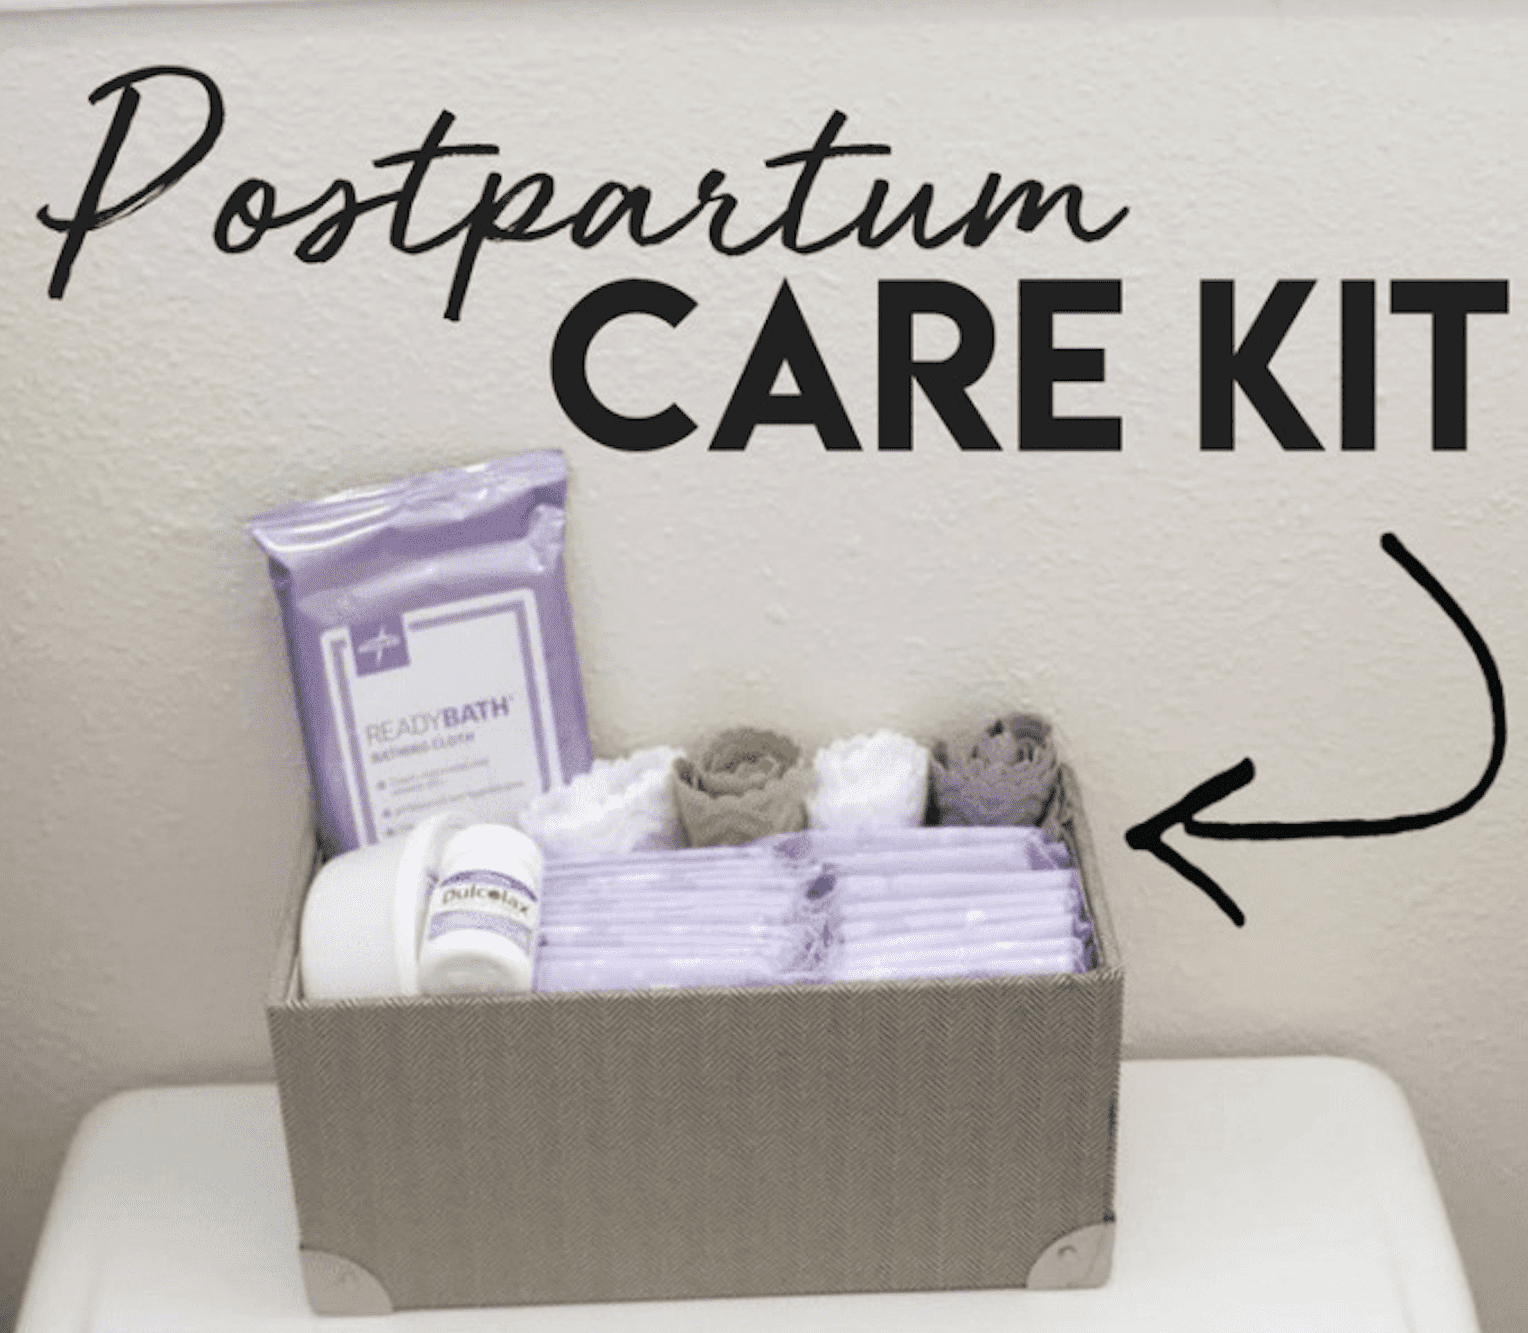 Postpartum Care Kit to Relieve Pain and Provide Comfort